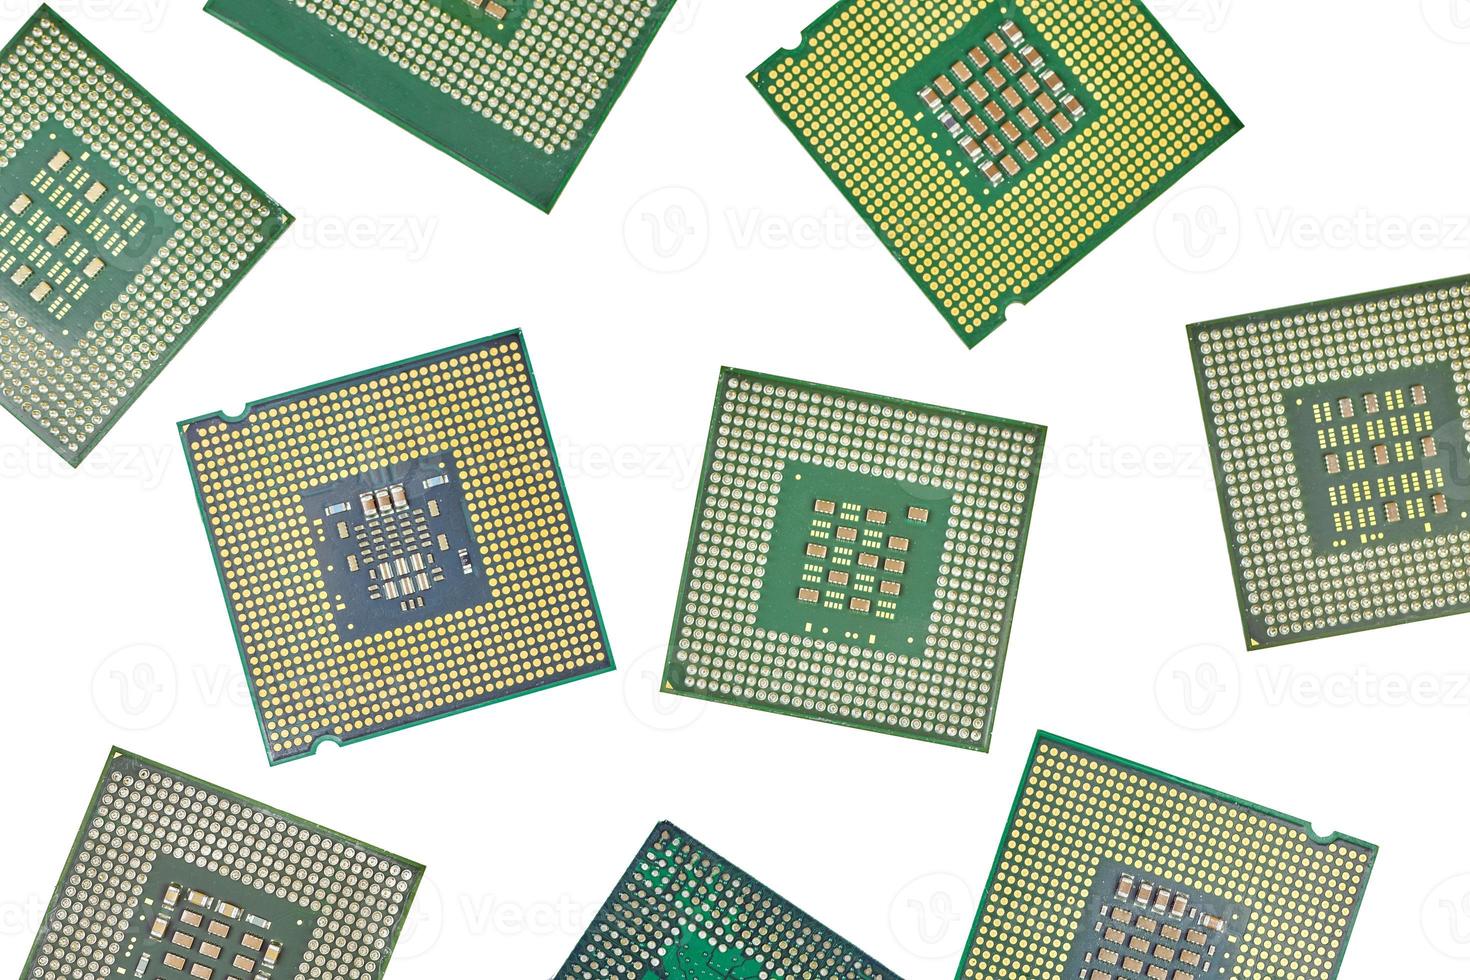 Bunch of CPU, central processor units, isolated background photo